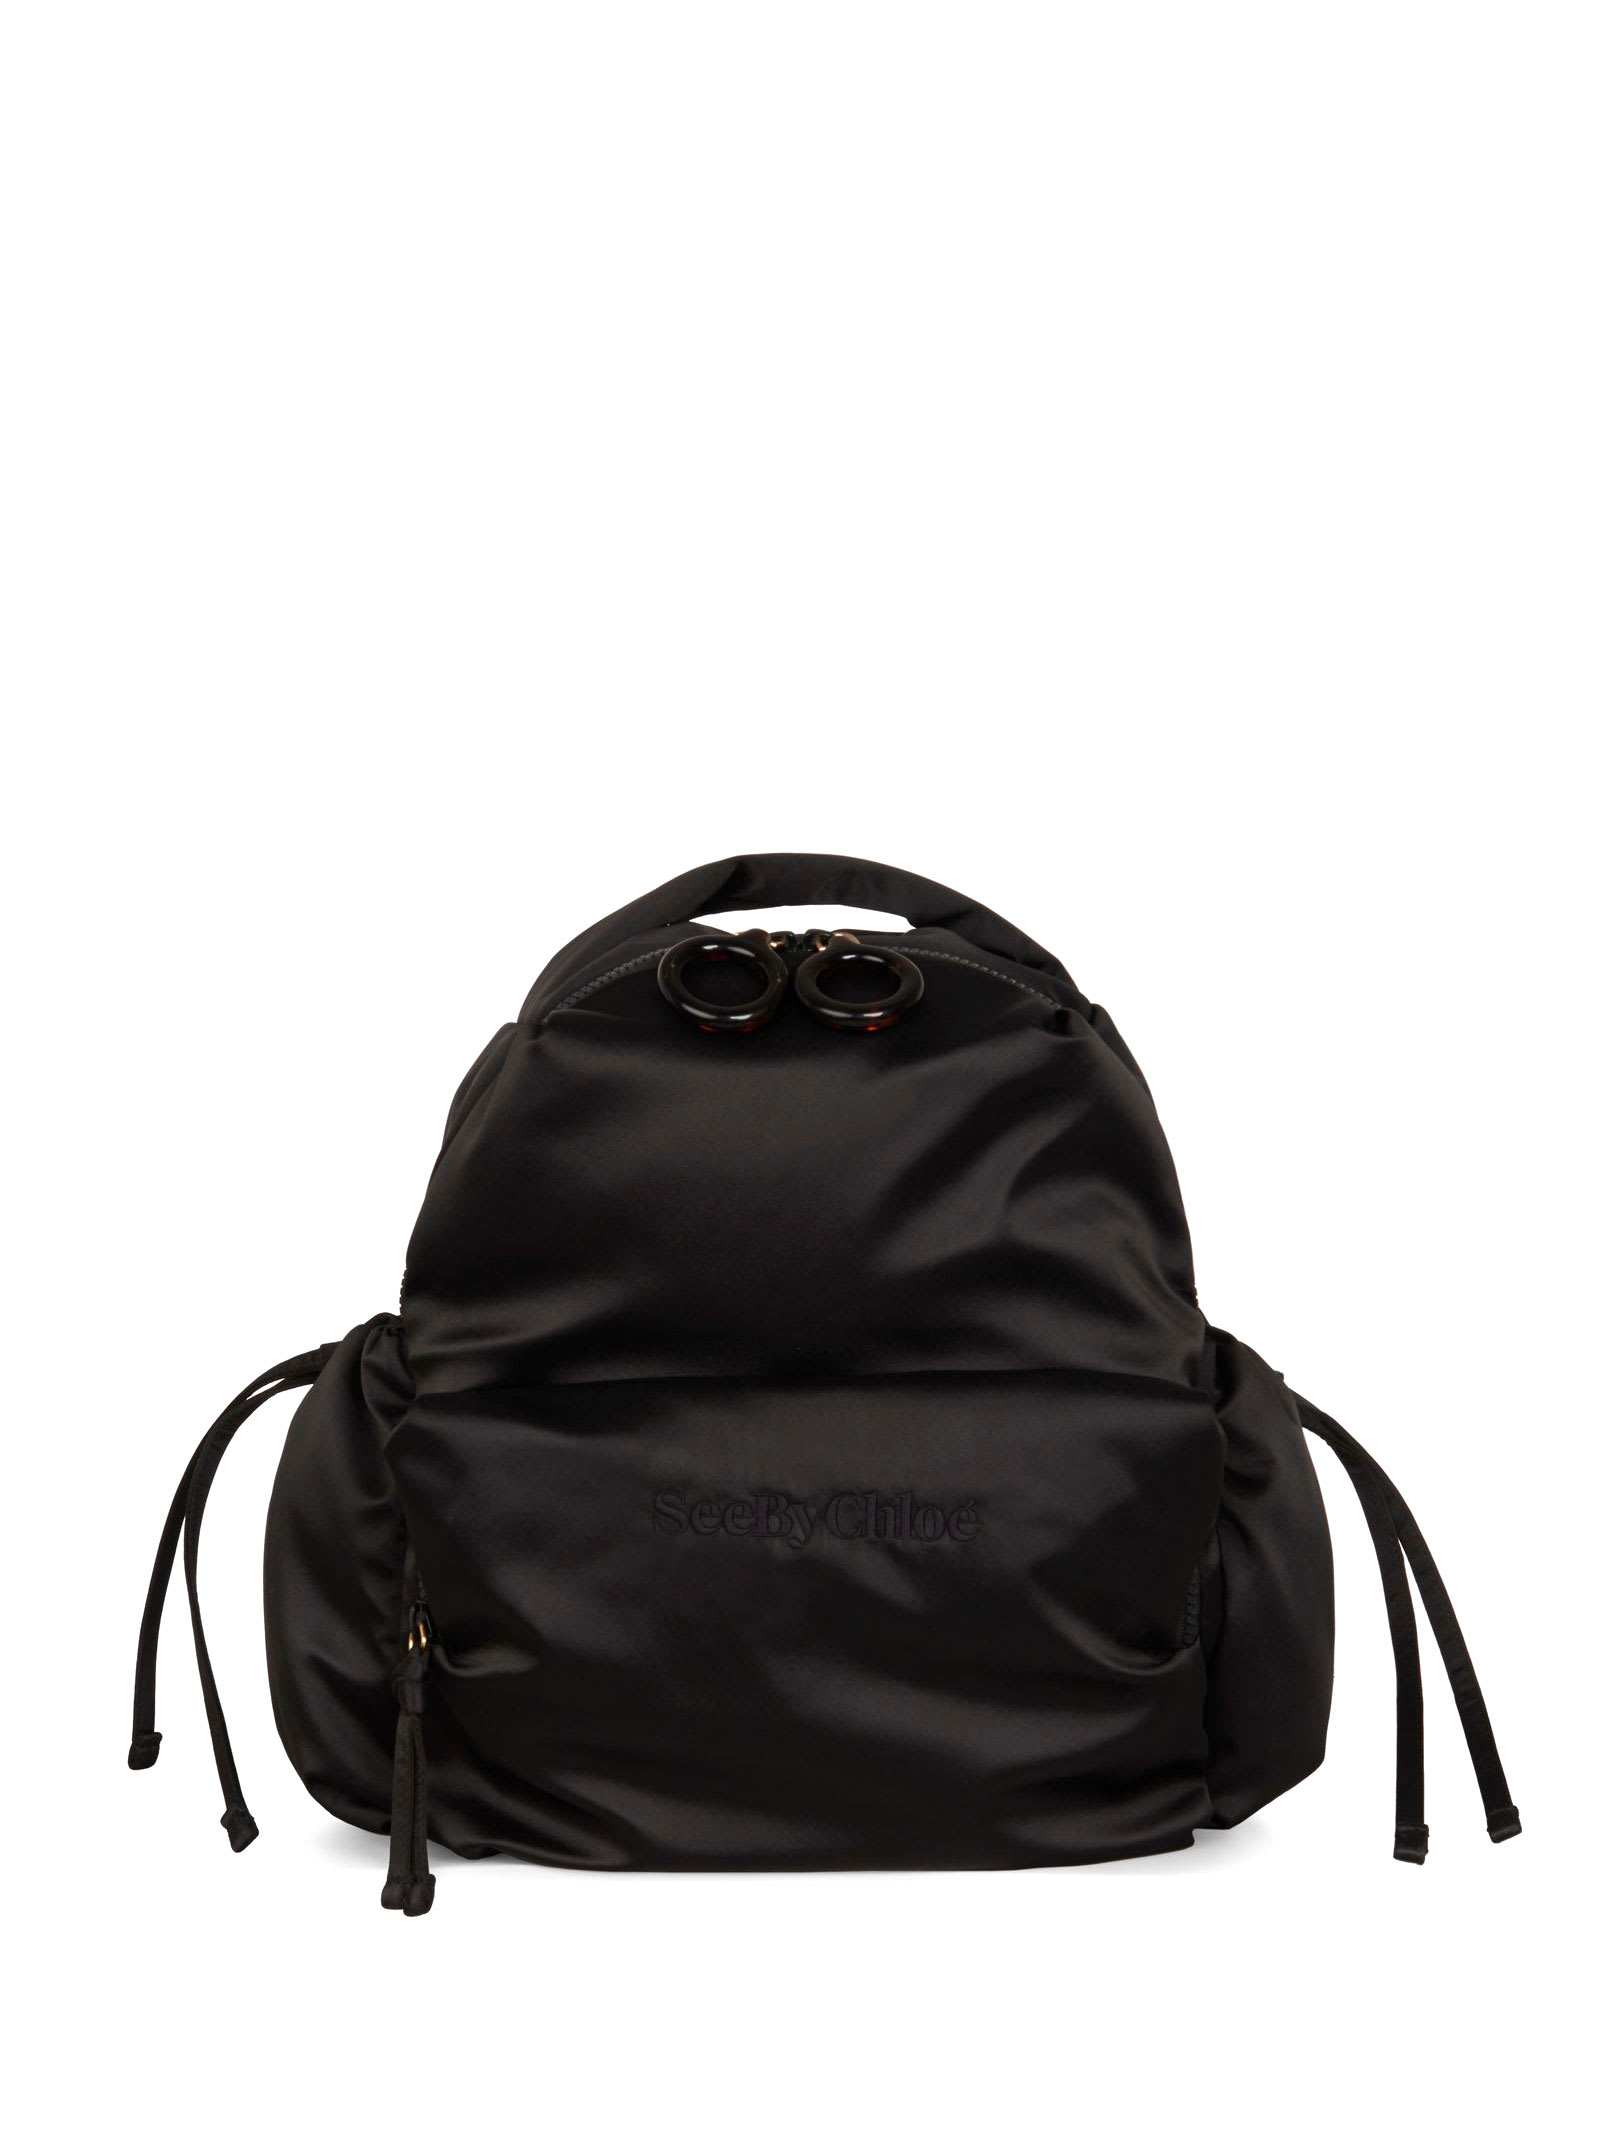 See by Chloé Tilly Backpack